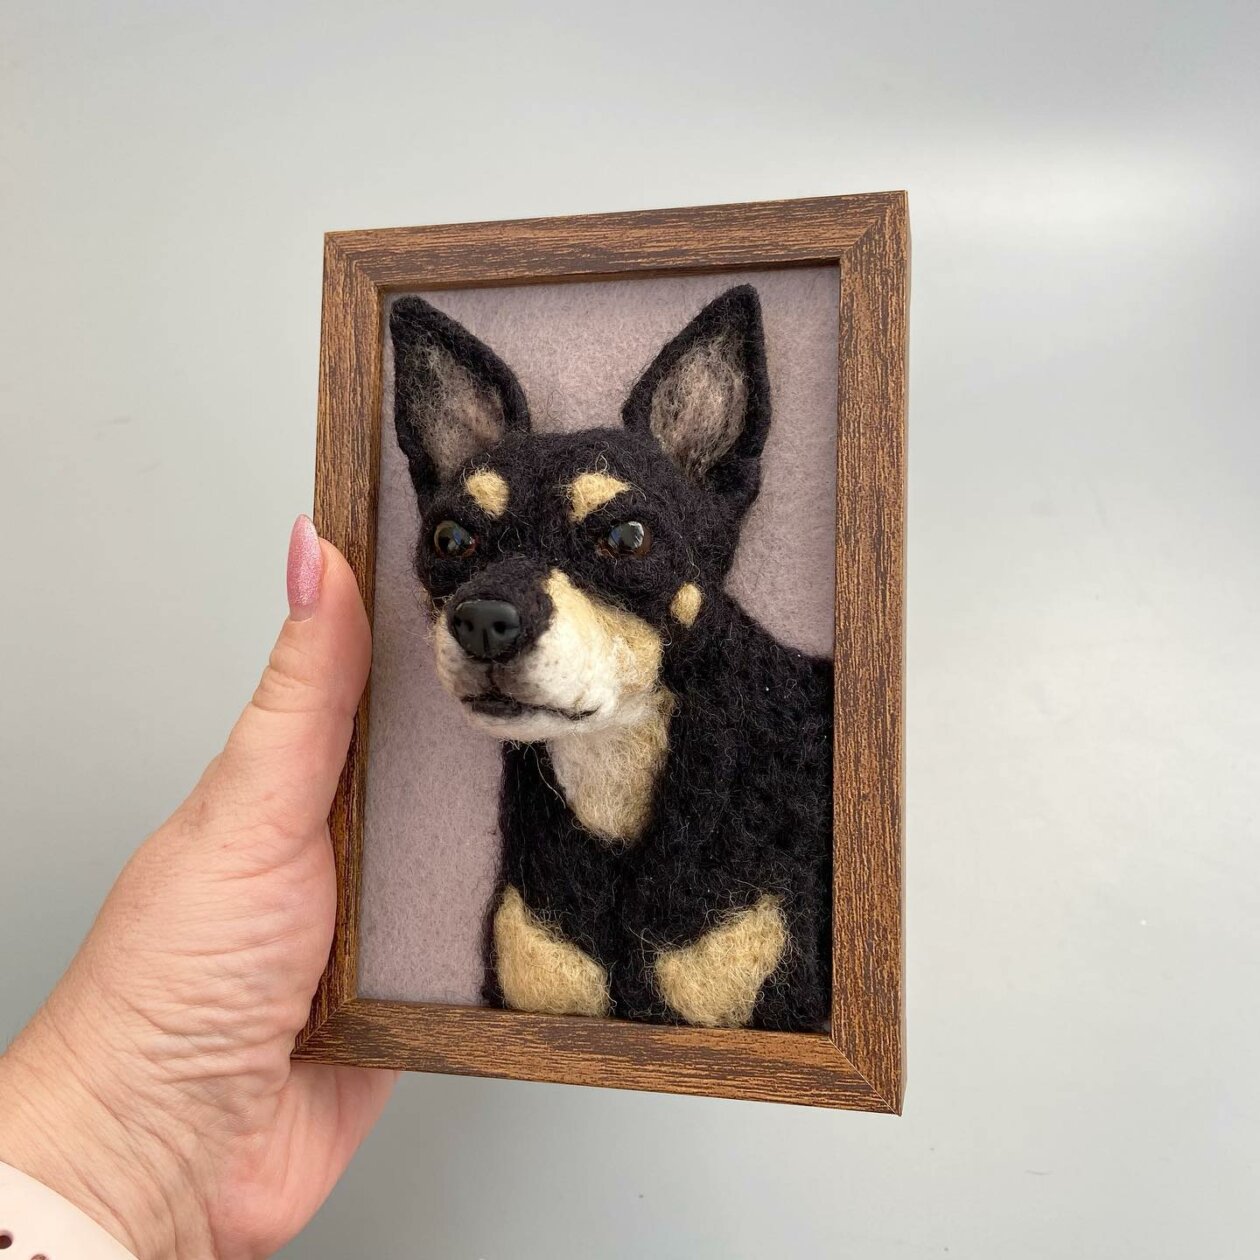 Hyper Realistic Animal Felted Wool Sculptures By Alla Rebrova (11)